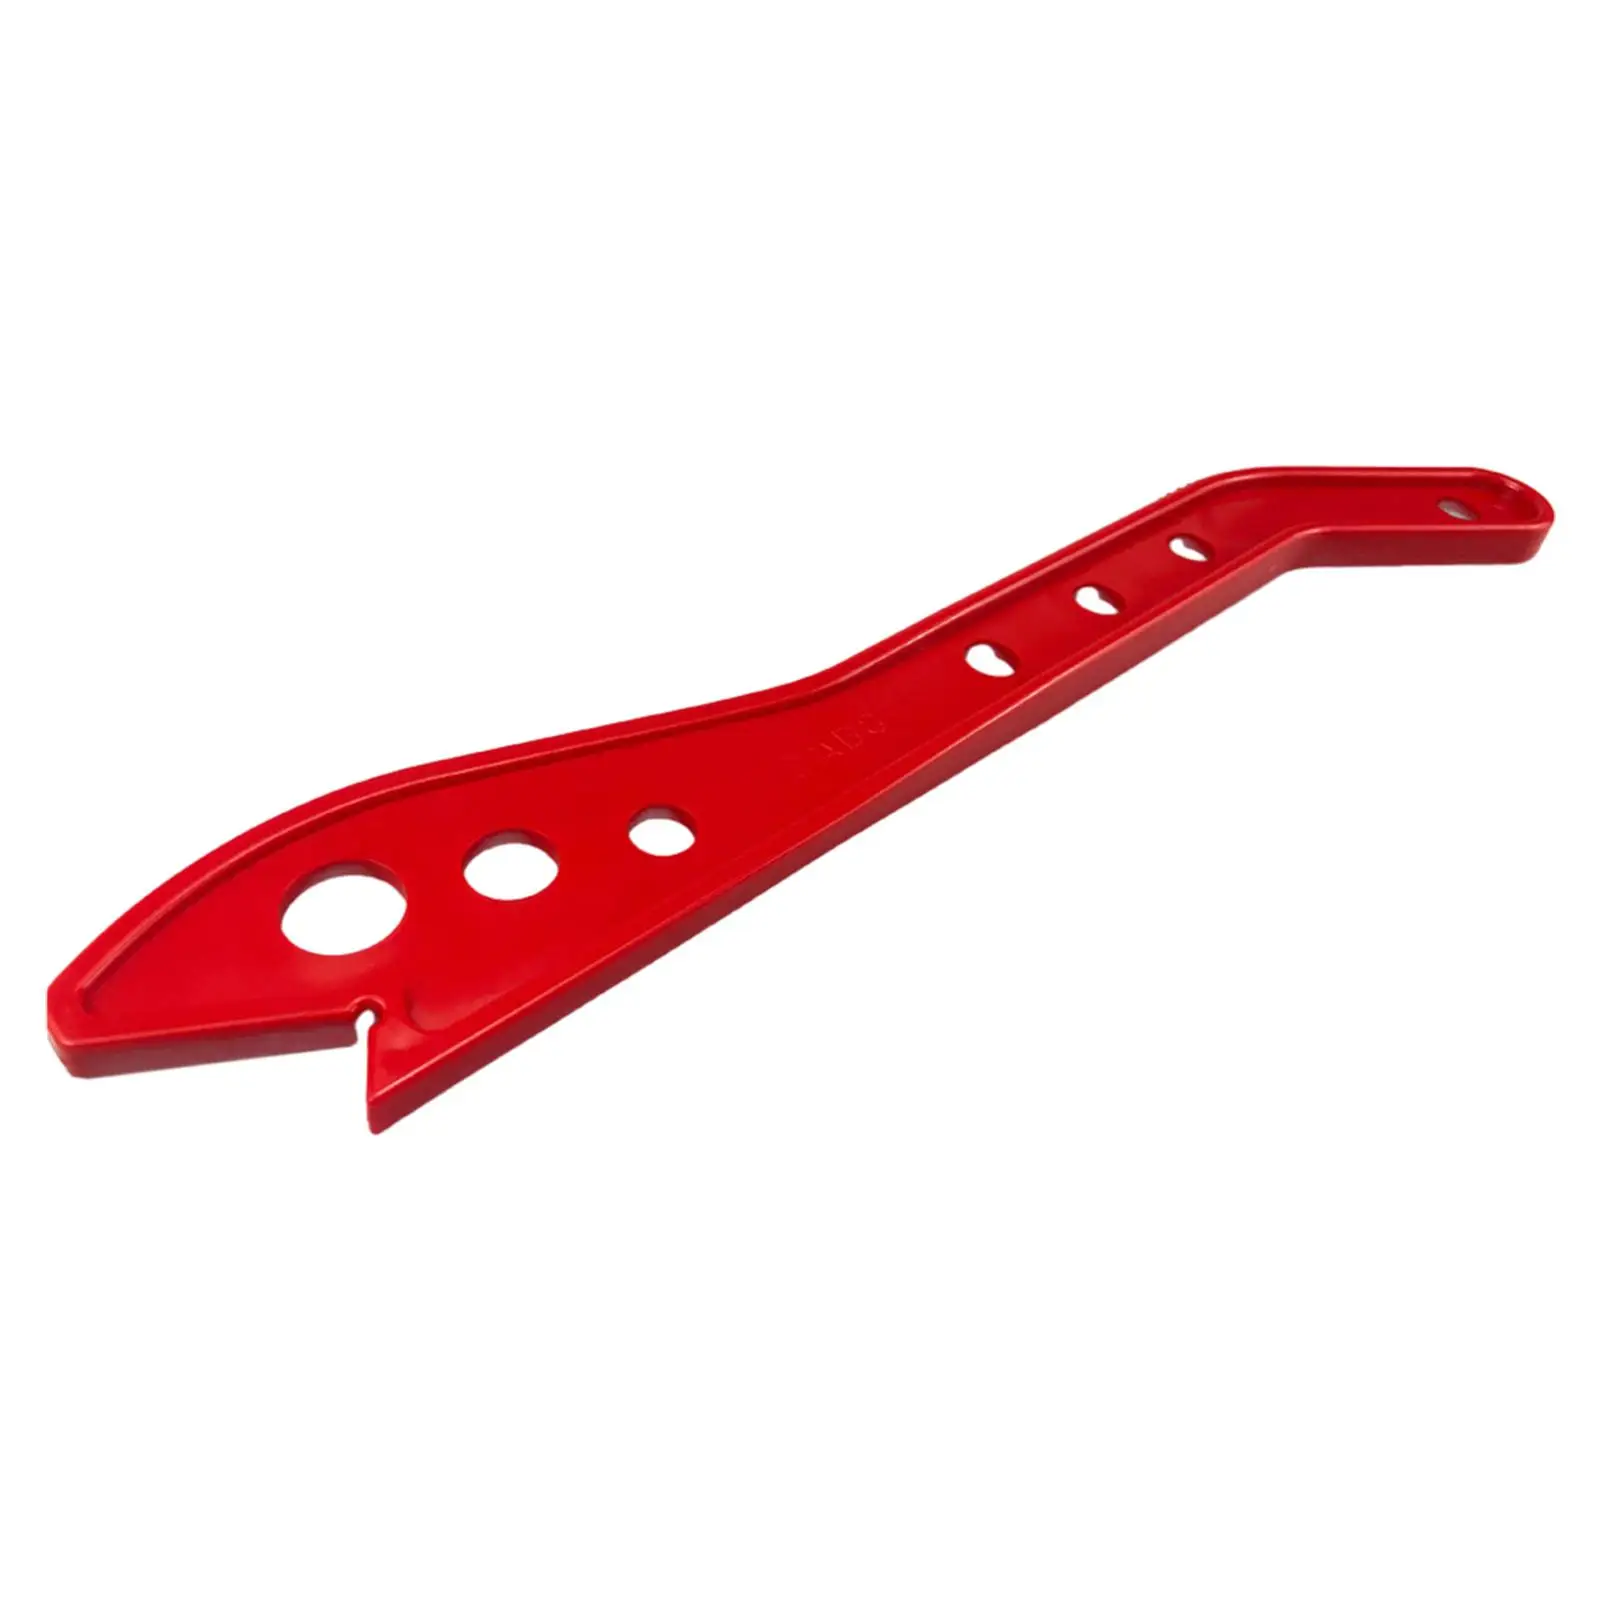 Woodworking Saw Pusher Push Rod Comfortable Grip for Professional and Amateur Woodworkers Durable Accessory Red Lightweight